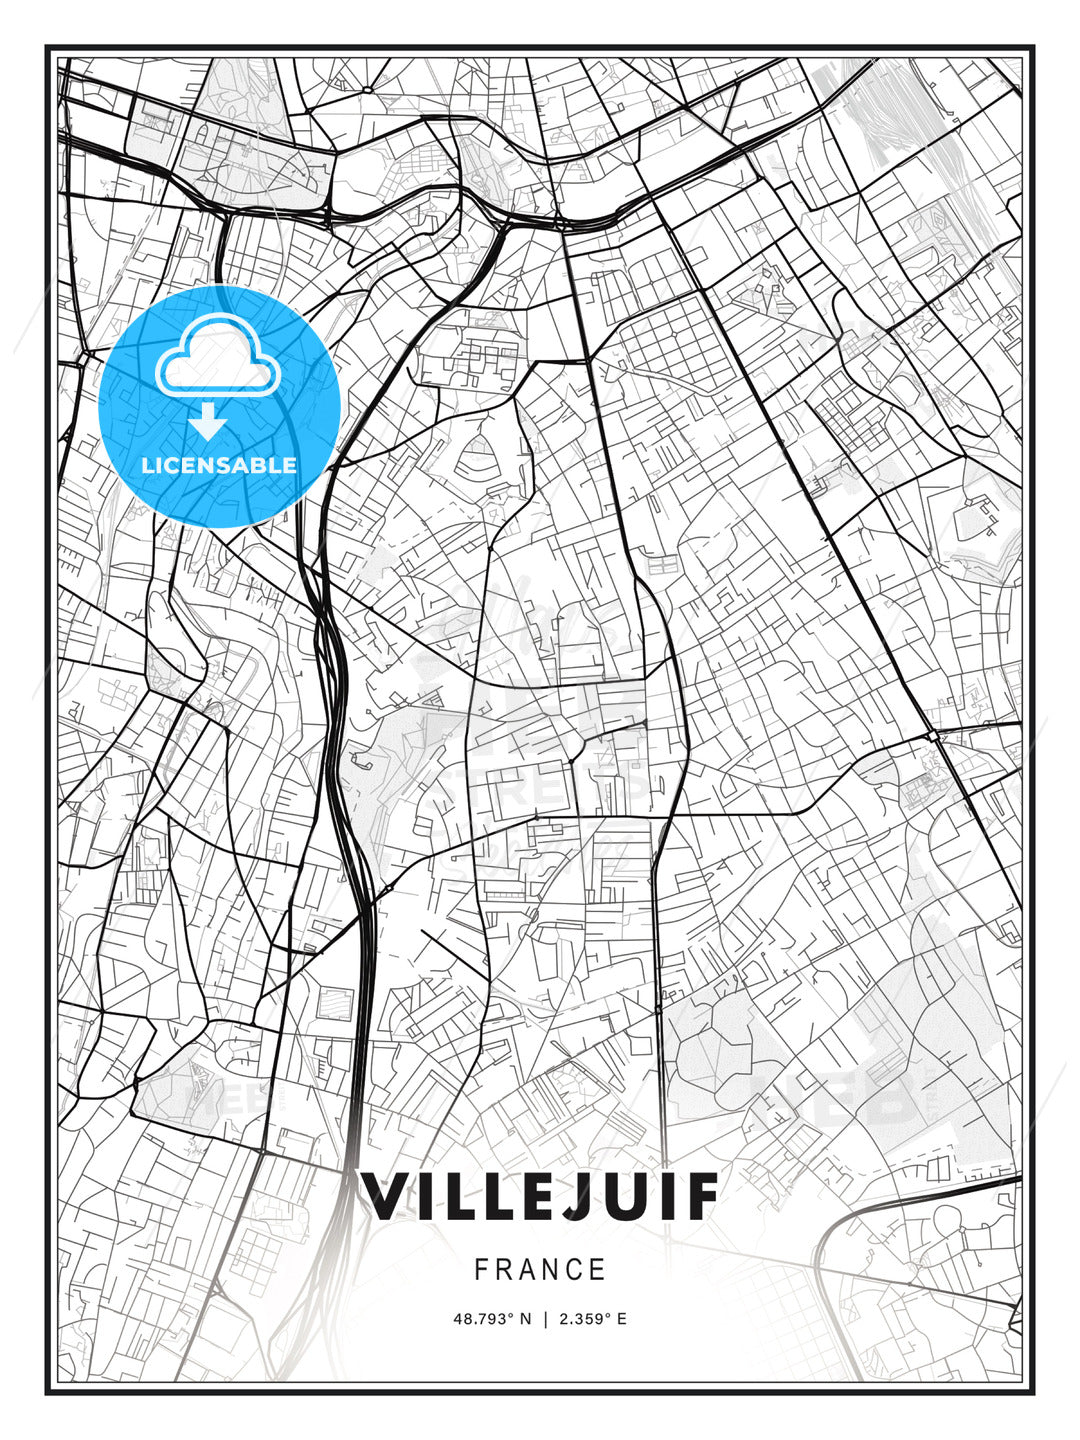 Villejuif, France, Modern Print Template in Various Formats - HEBSTREITS Sketches